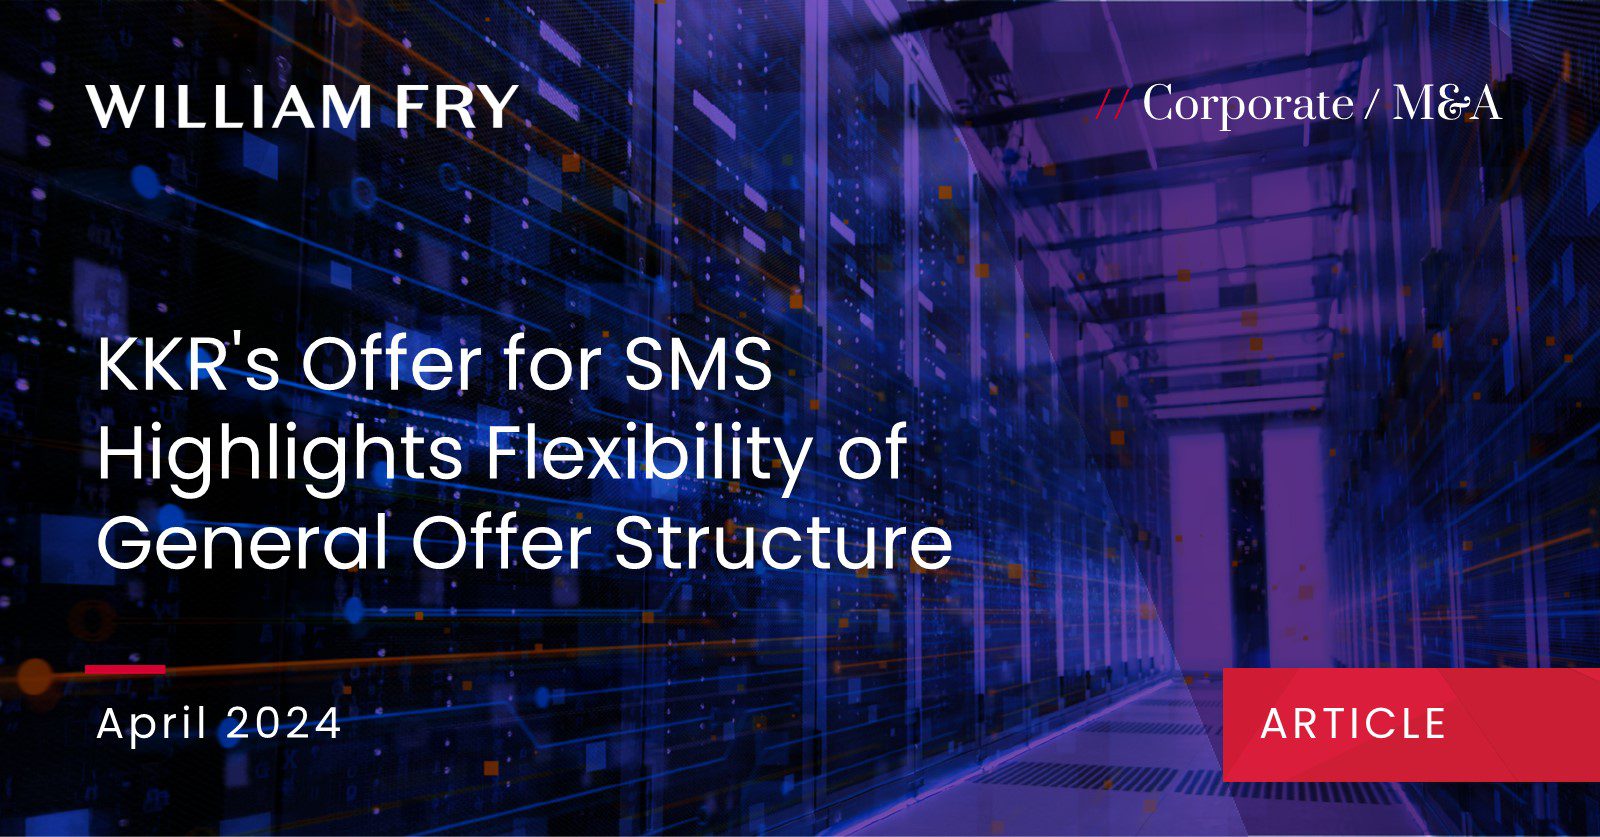 KKR's Offer for SMS Highlights Flexibility of General Offer Structure